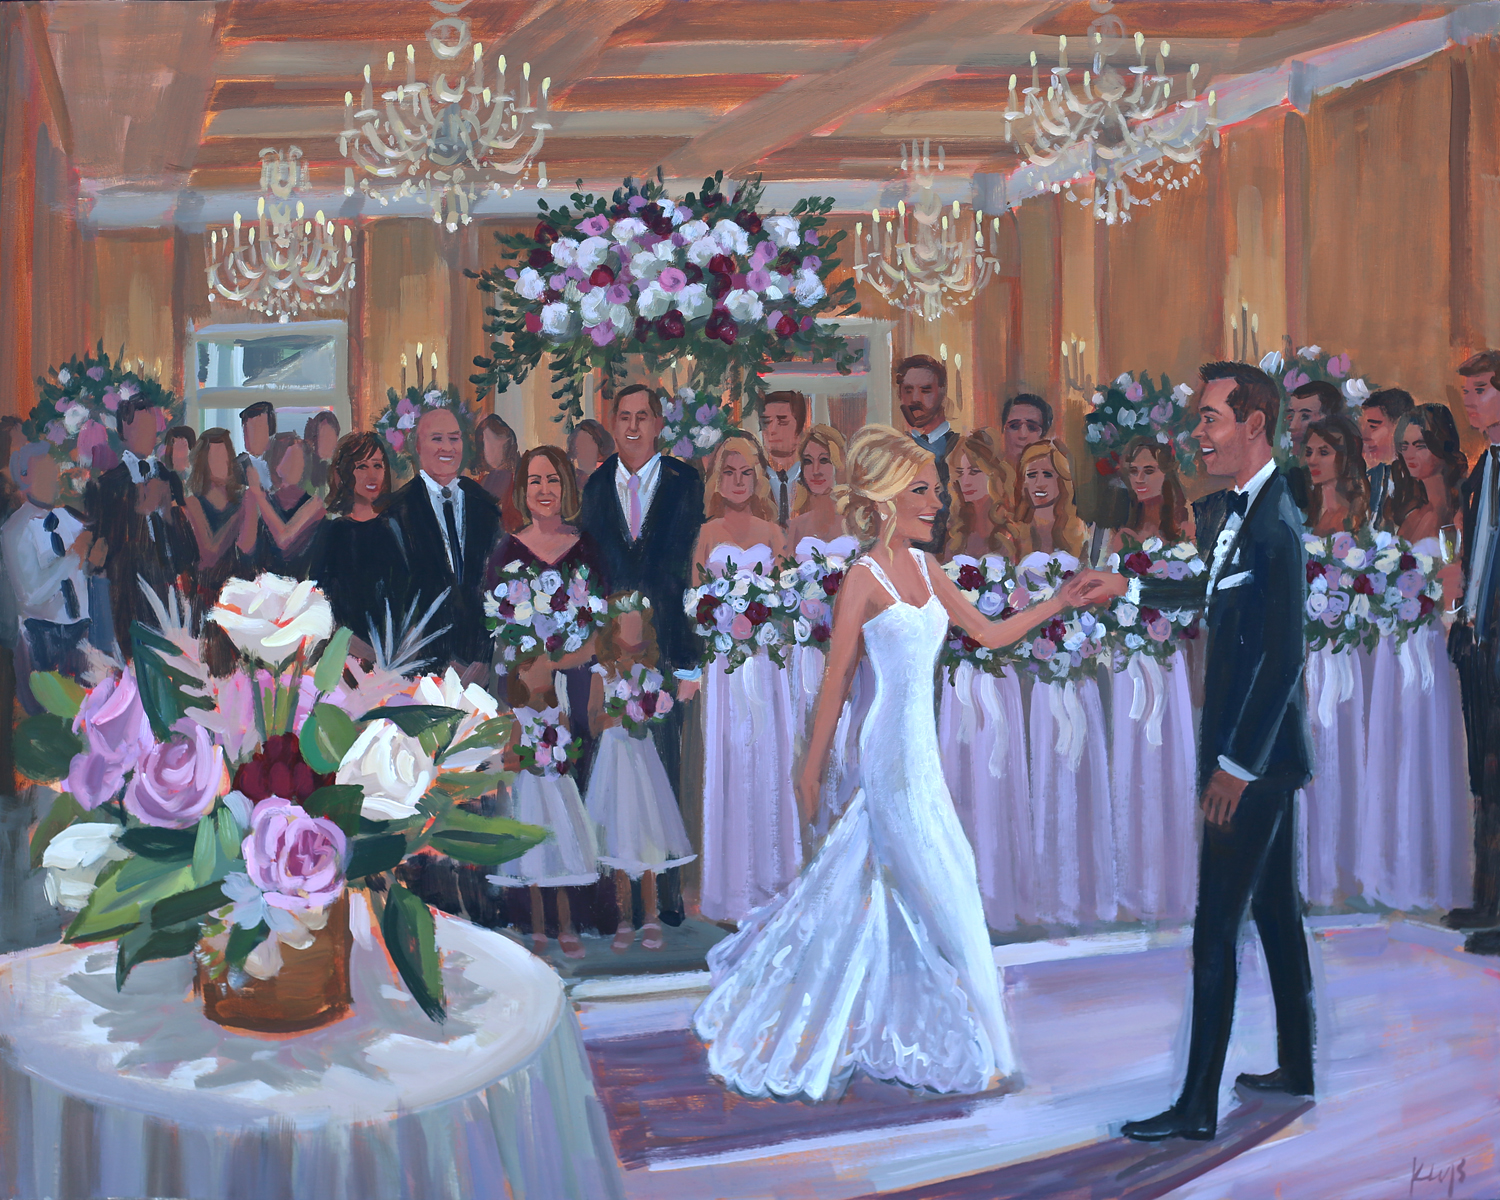 Live Wedding Painter, Ben Keys, captured Laura + Chris' first dance surrounded by their family and friends at Wilmington, NC's Cape Fear Country Club.